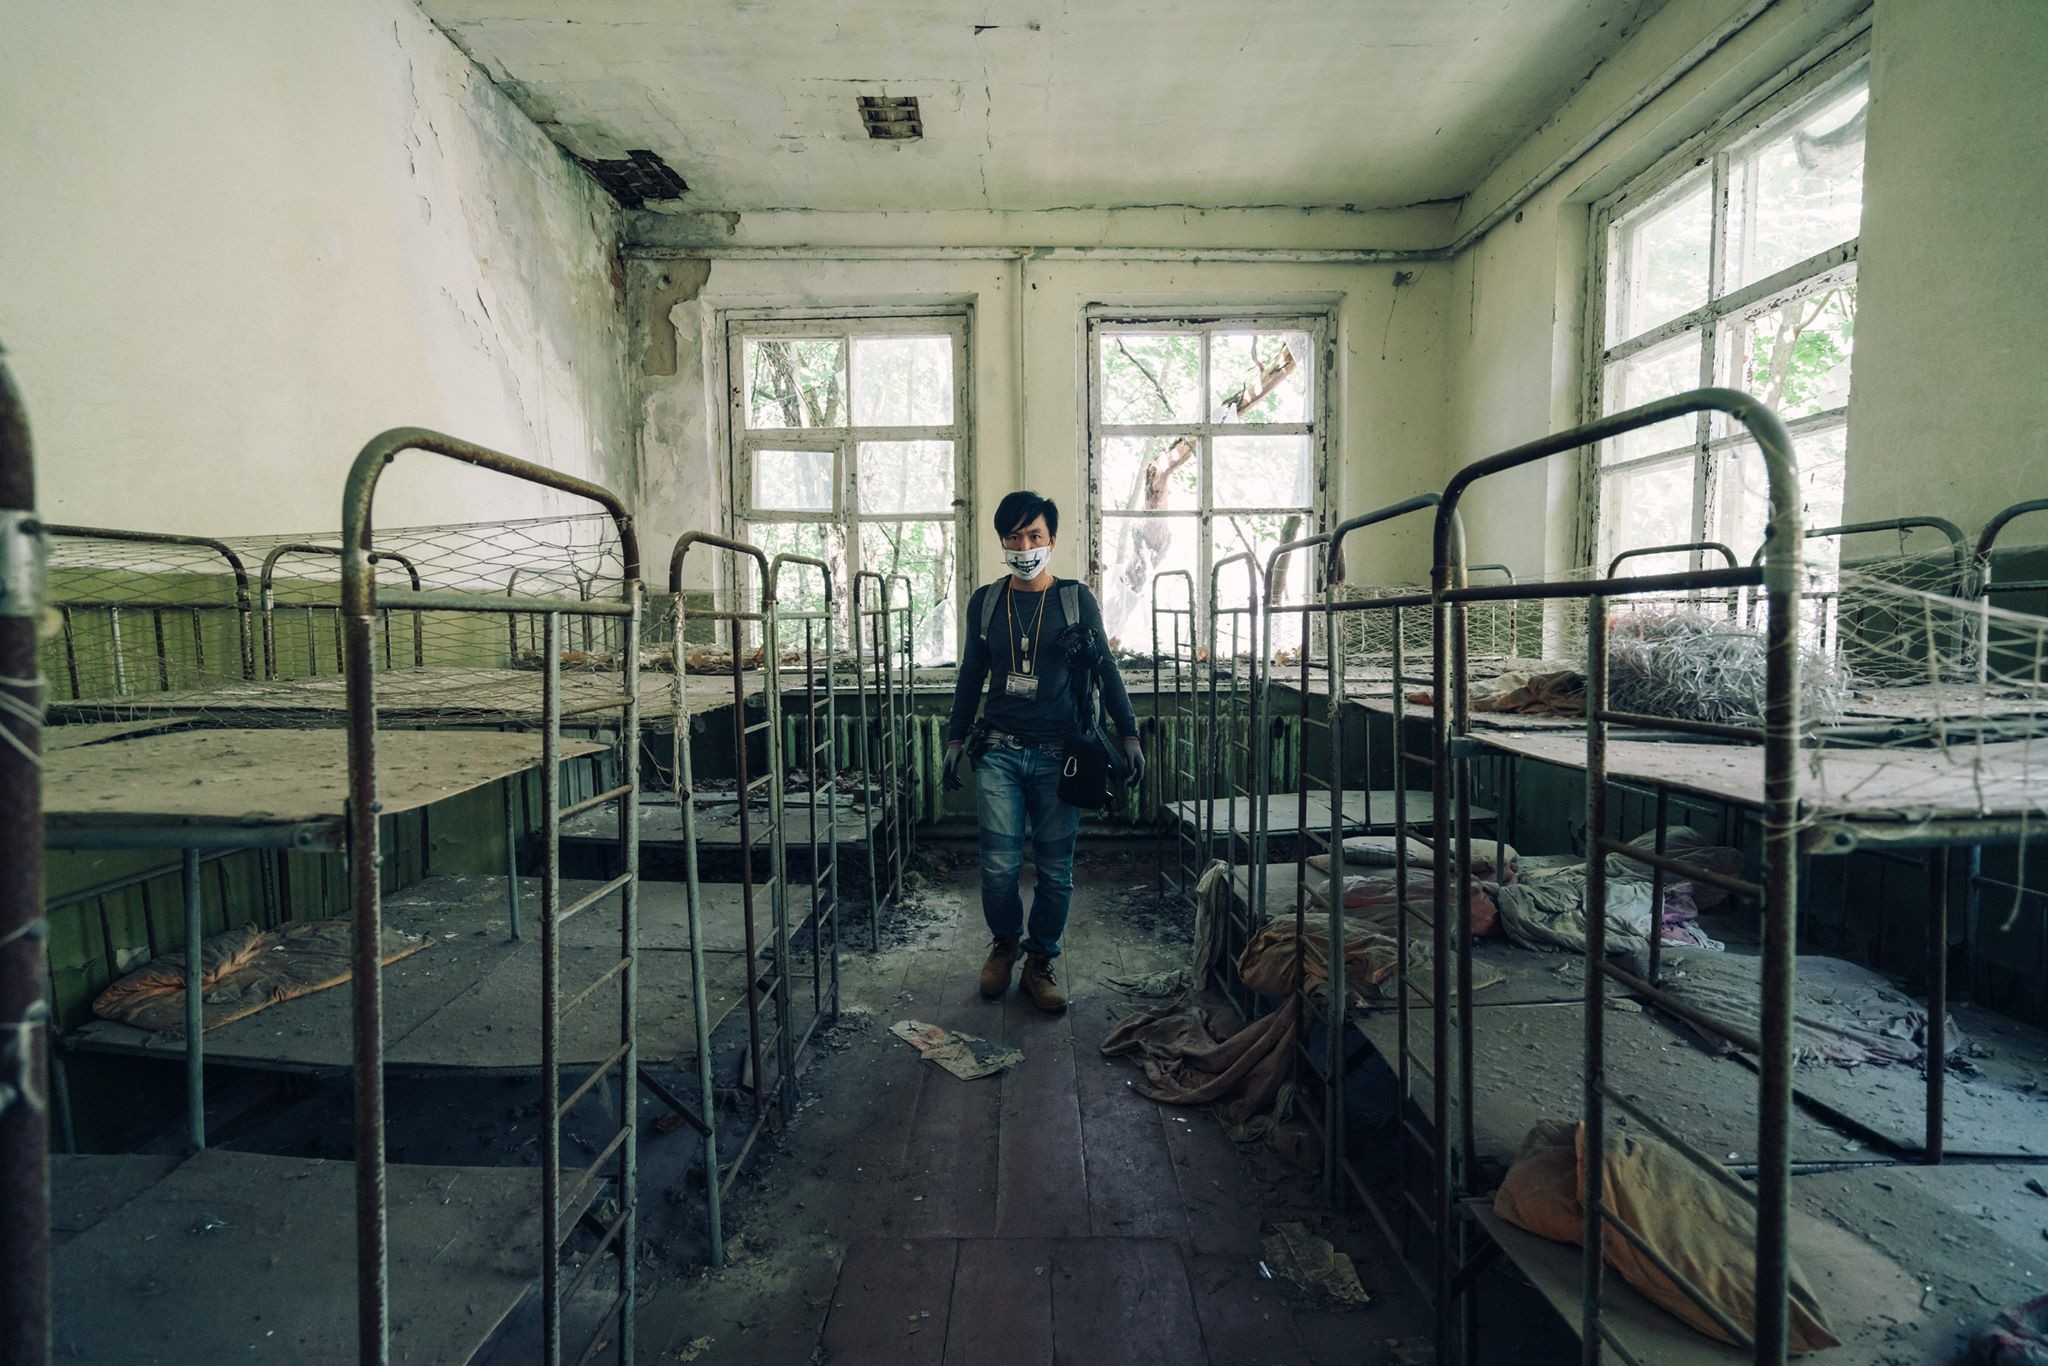 Steven Wu in an abandoned kindergarten in Pripyat inside the Chernobyl exclusion zone. Photo: Handout